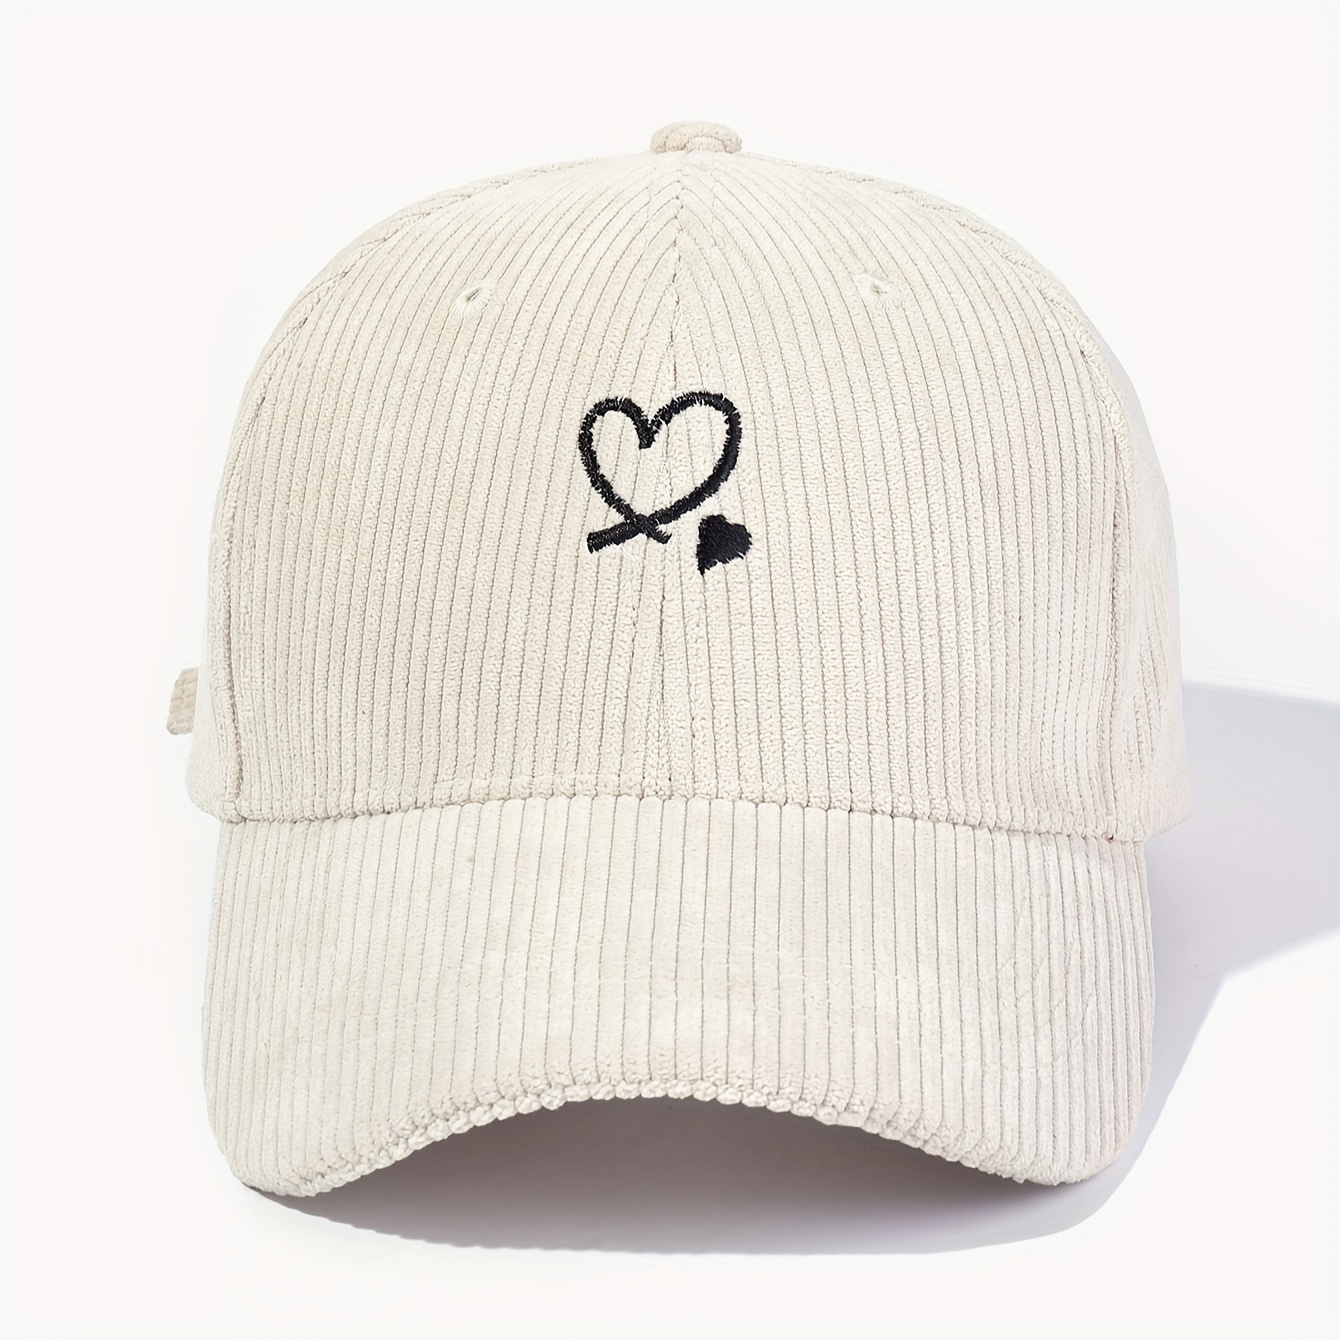 

Black Embroidery Simple Baseball Cap Trendy Beige Corduroy Hats Lightweight Adjustable Dad Hat For Women Daily Uses Valentine's Day Gift